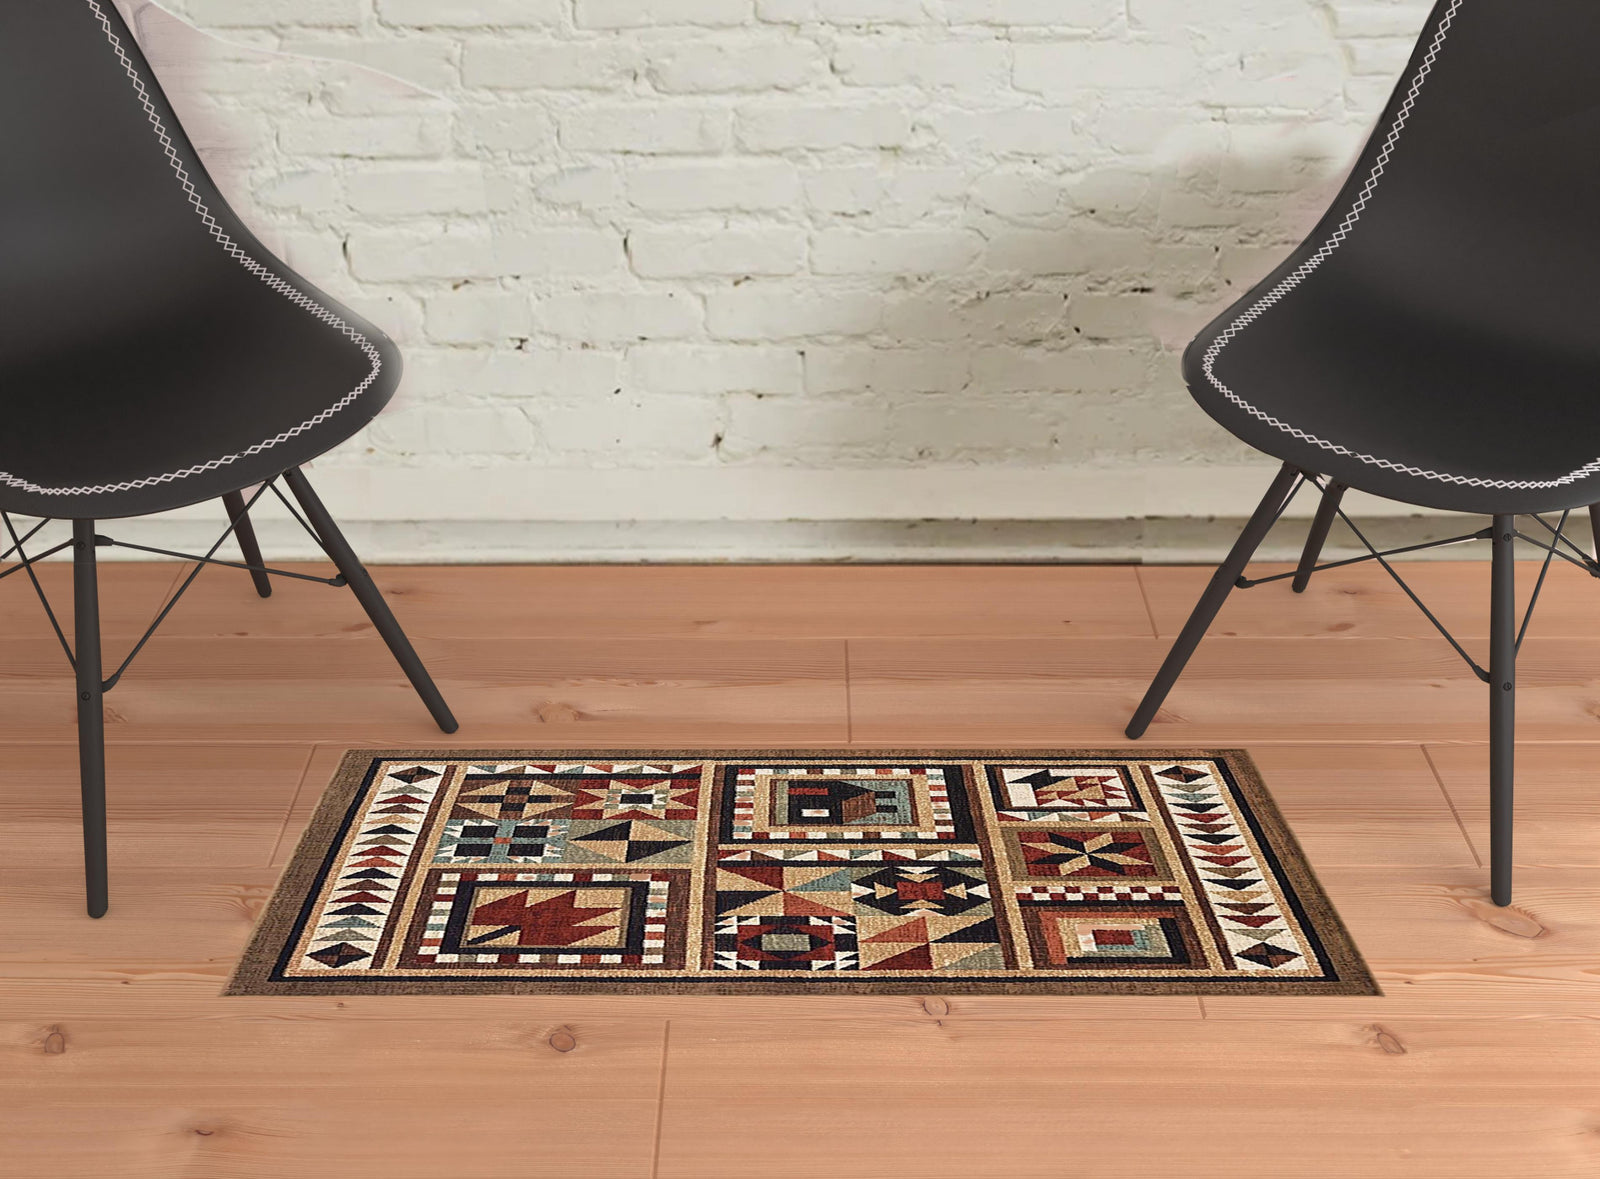 2’X8’ Brown And Red Ikat Patchwork Runner Rug